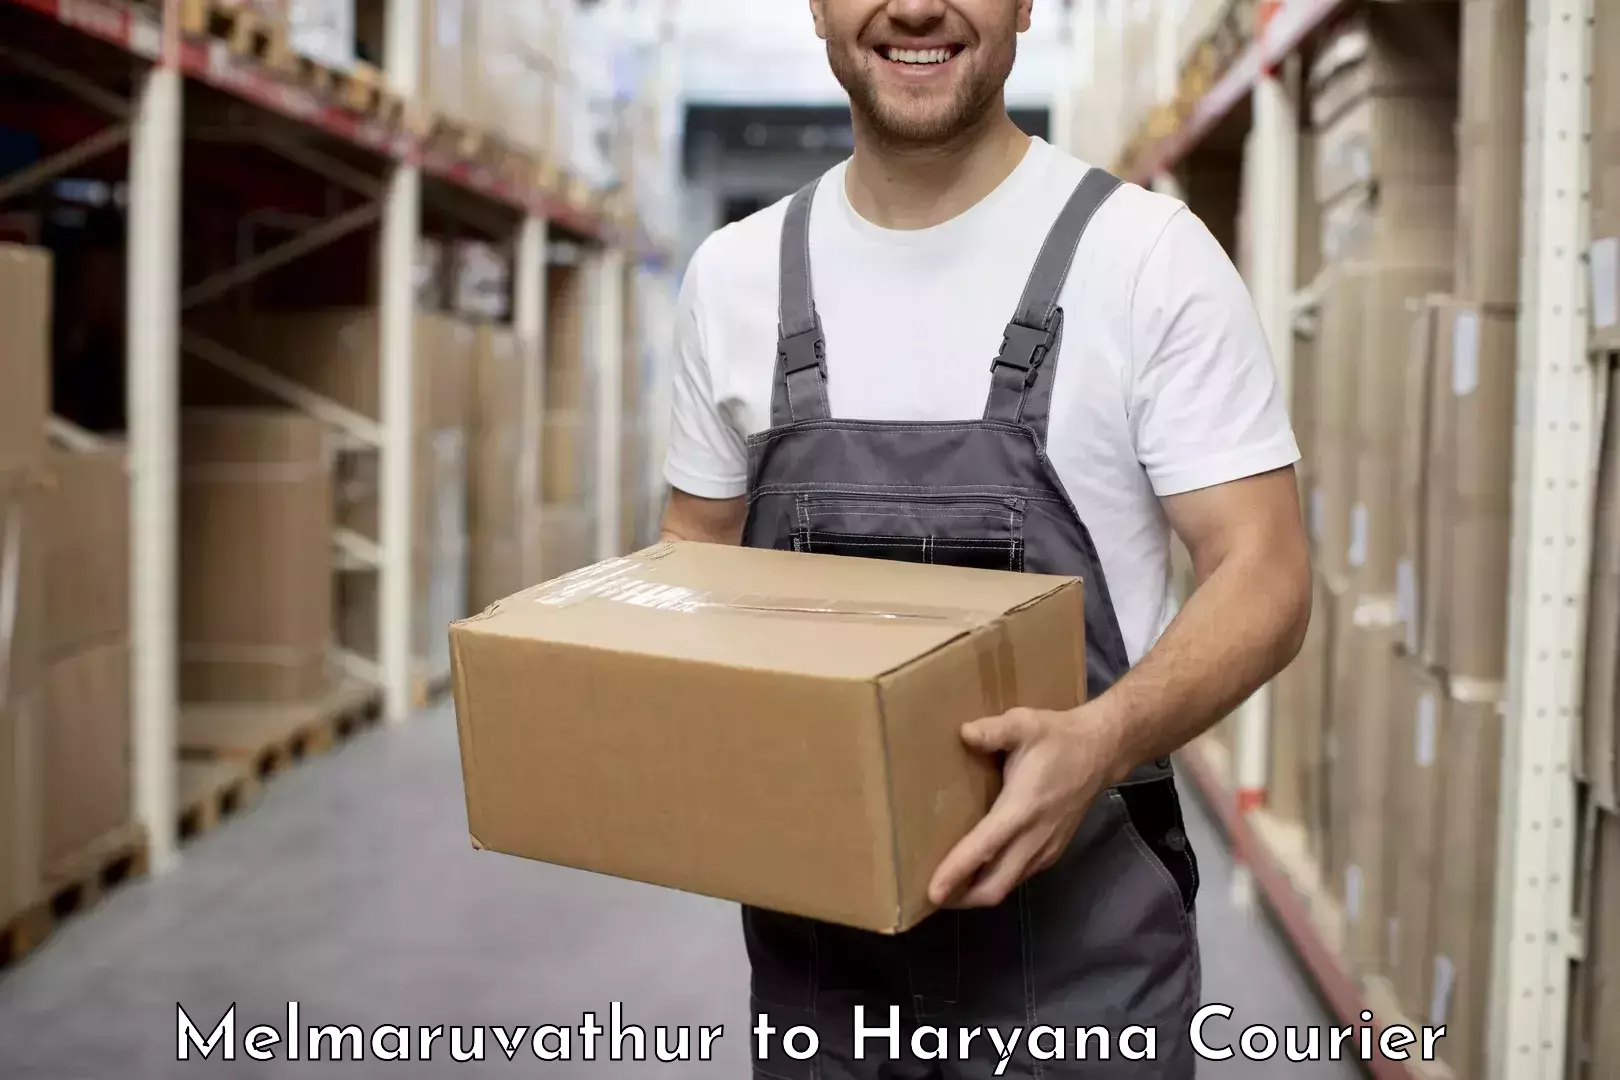 Courier app Melmaruvathur to Chaudhary Charan Singh Haryana Agricultural University Hisar